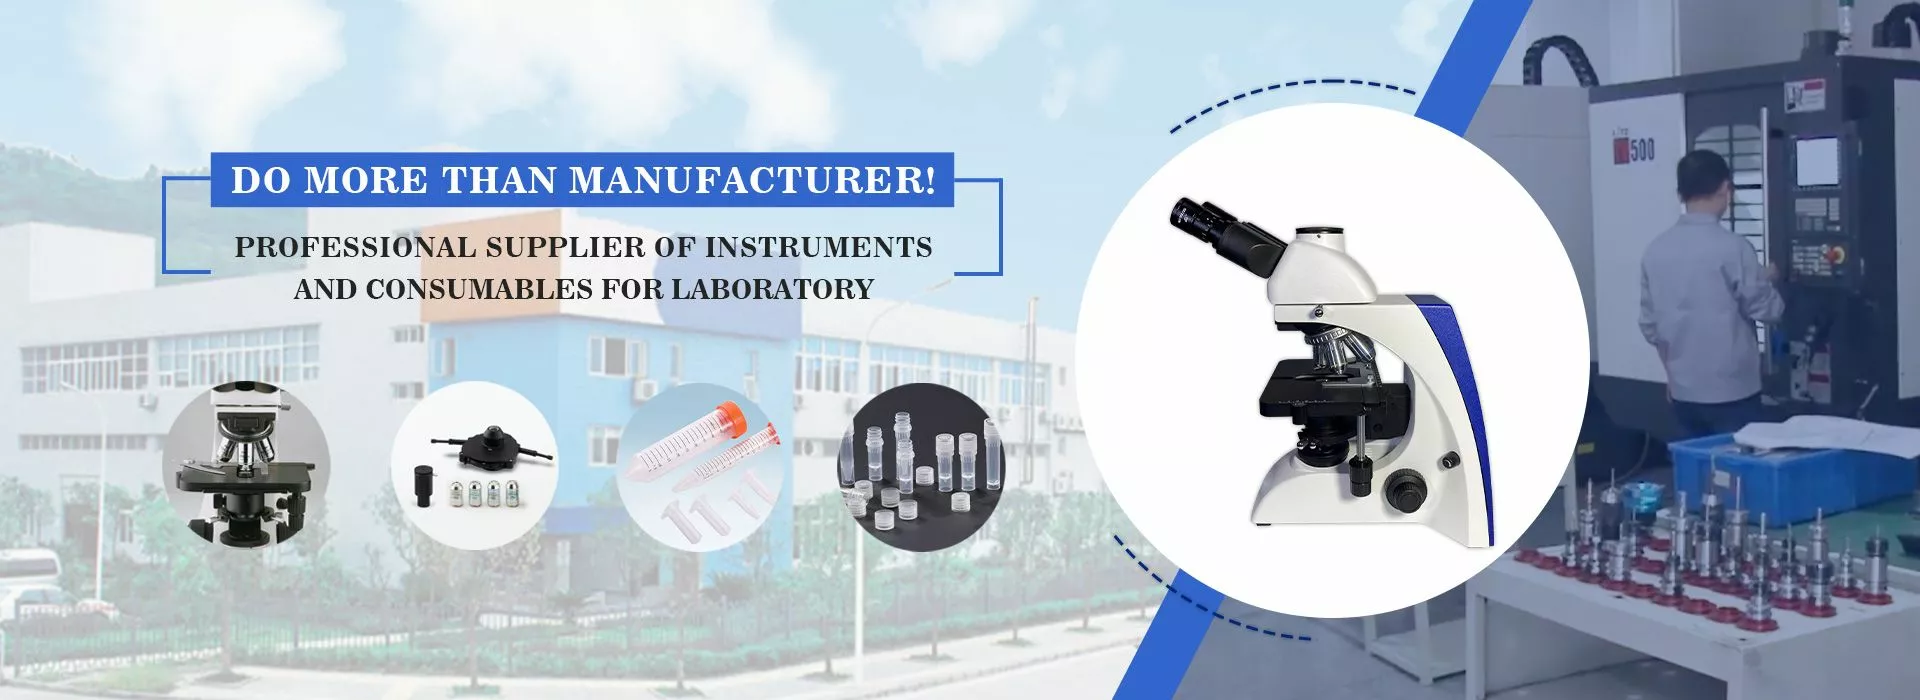 professional supplier of instruments and consumables for laboratory